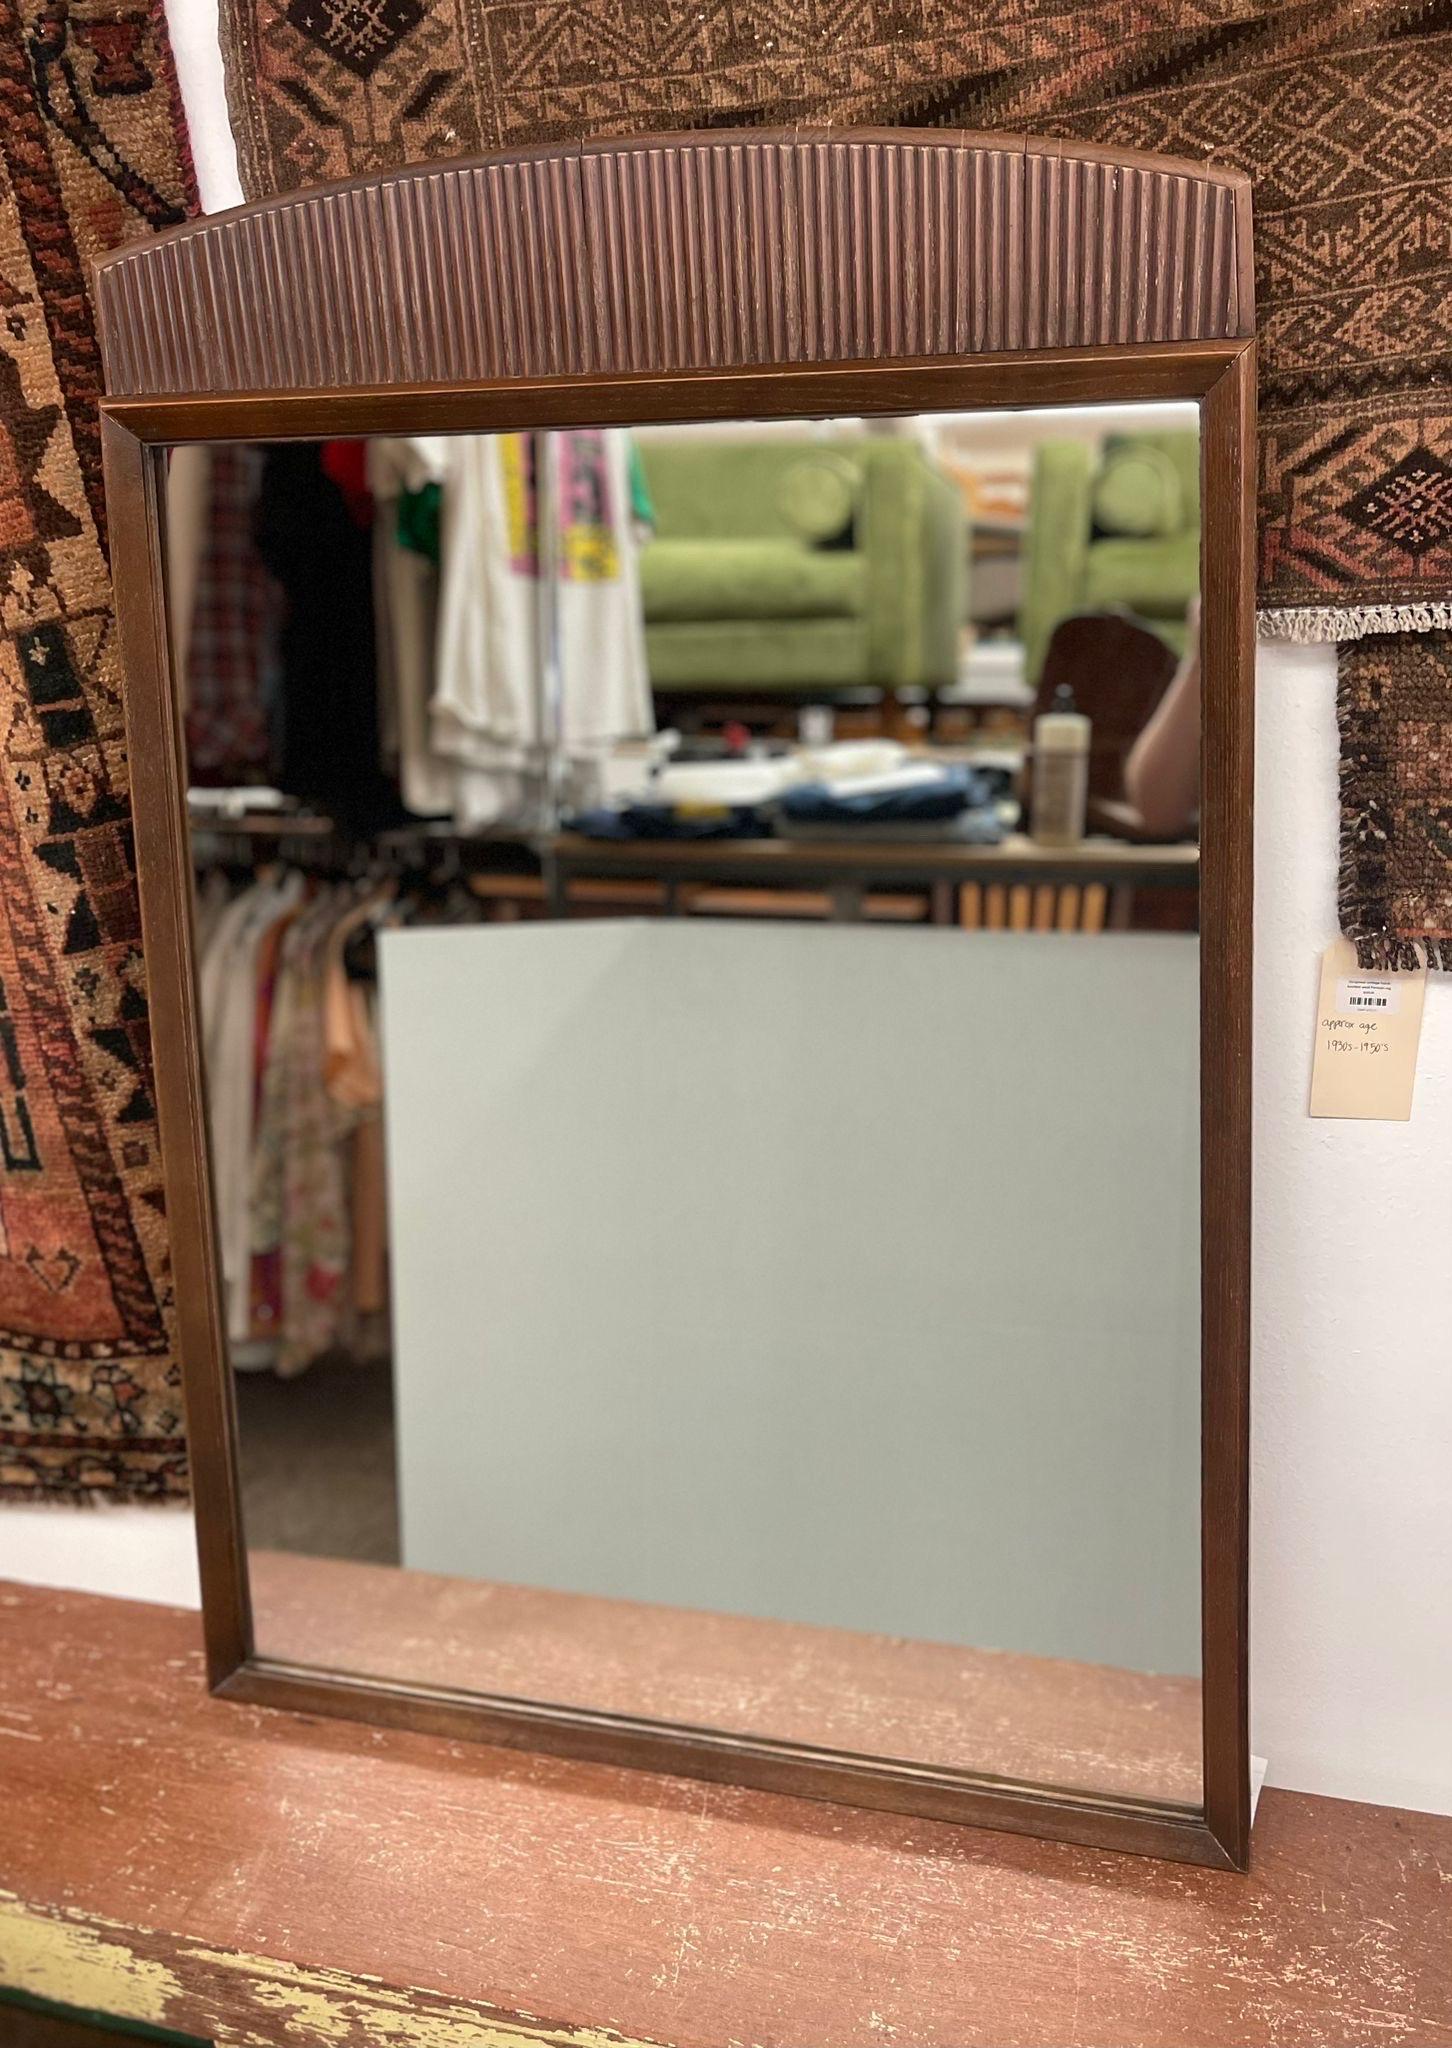 Wood Framed Mirror. The Top of this Mirror has Gorgeous Fluting. Vintage Condition Consistent with Age.

Dimensions. 29 W ; 3/4 D ; 43 1/2 H.